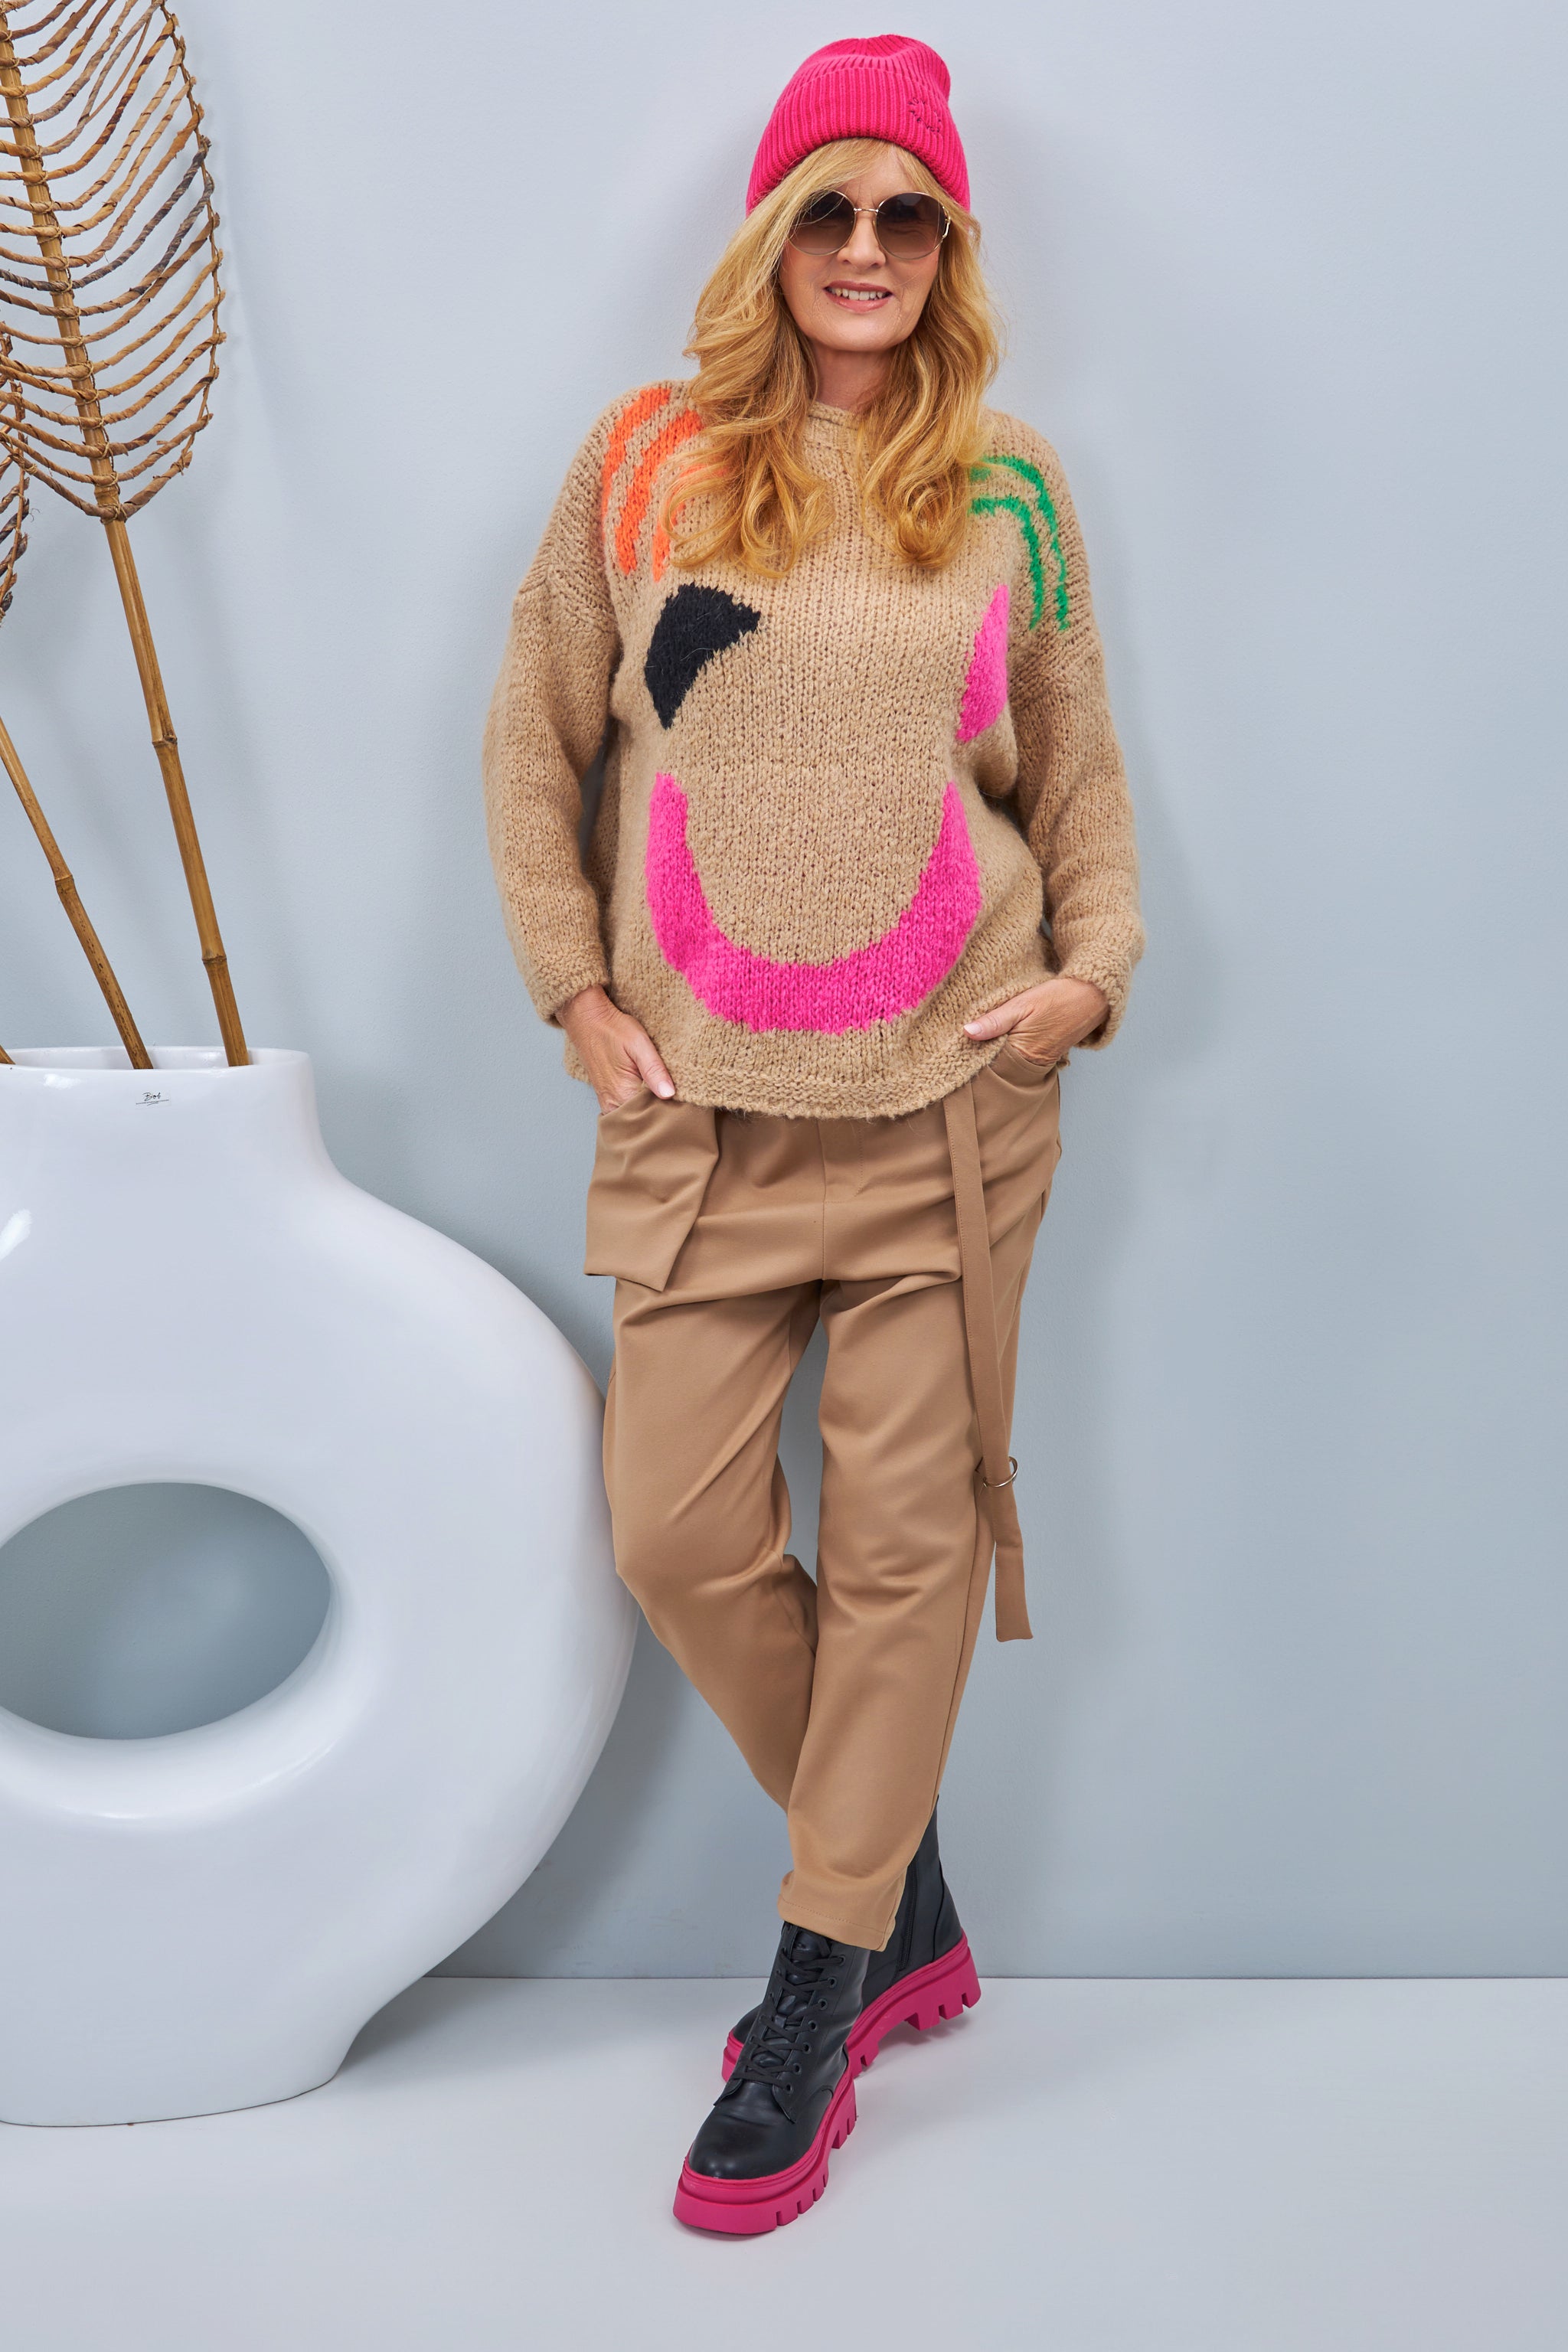 Knitted sweater with “wink smiley”, camel-colored